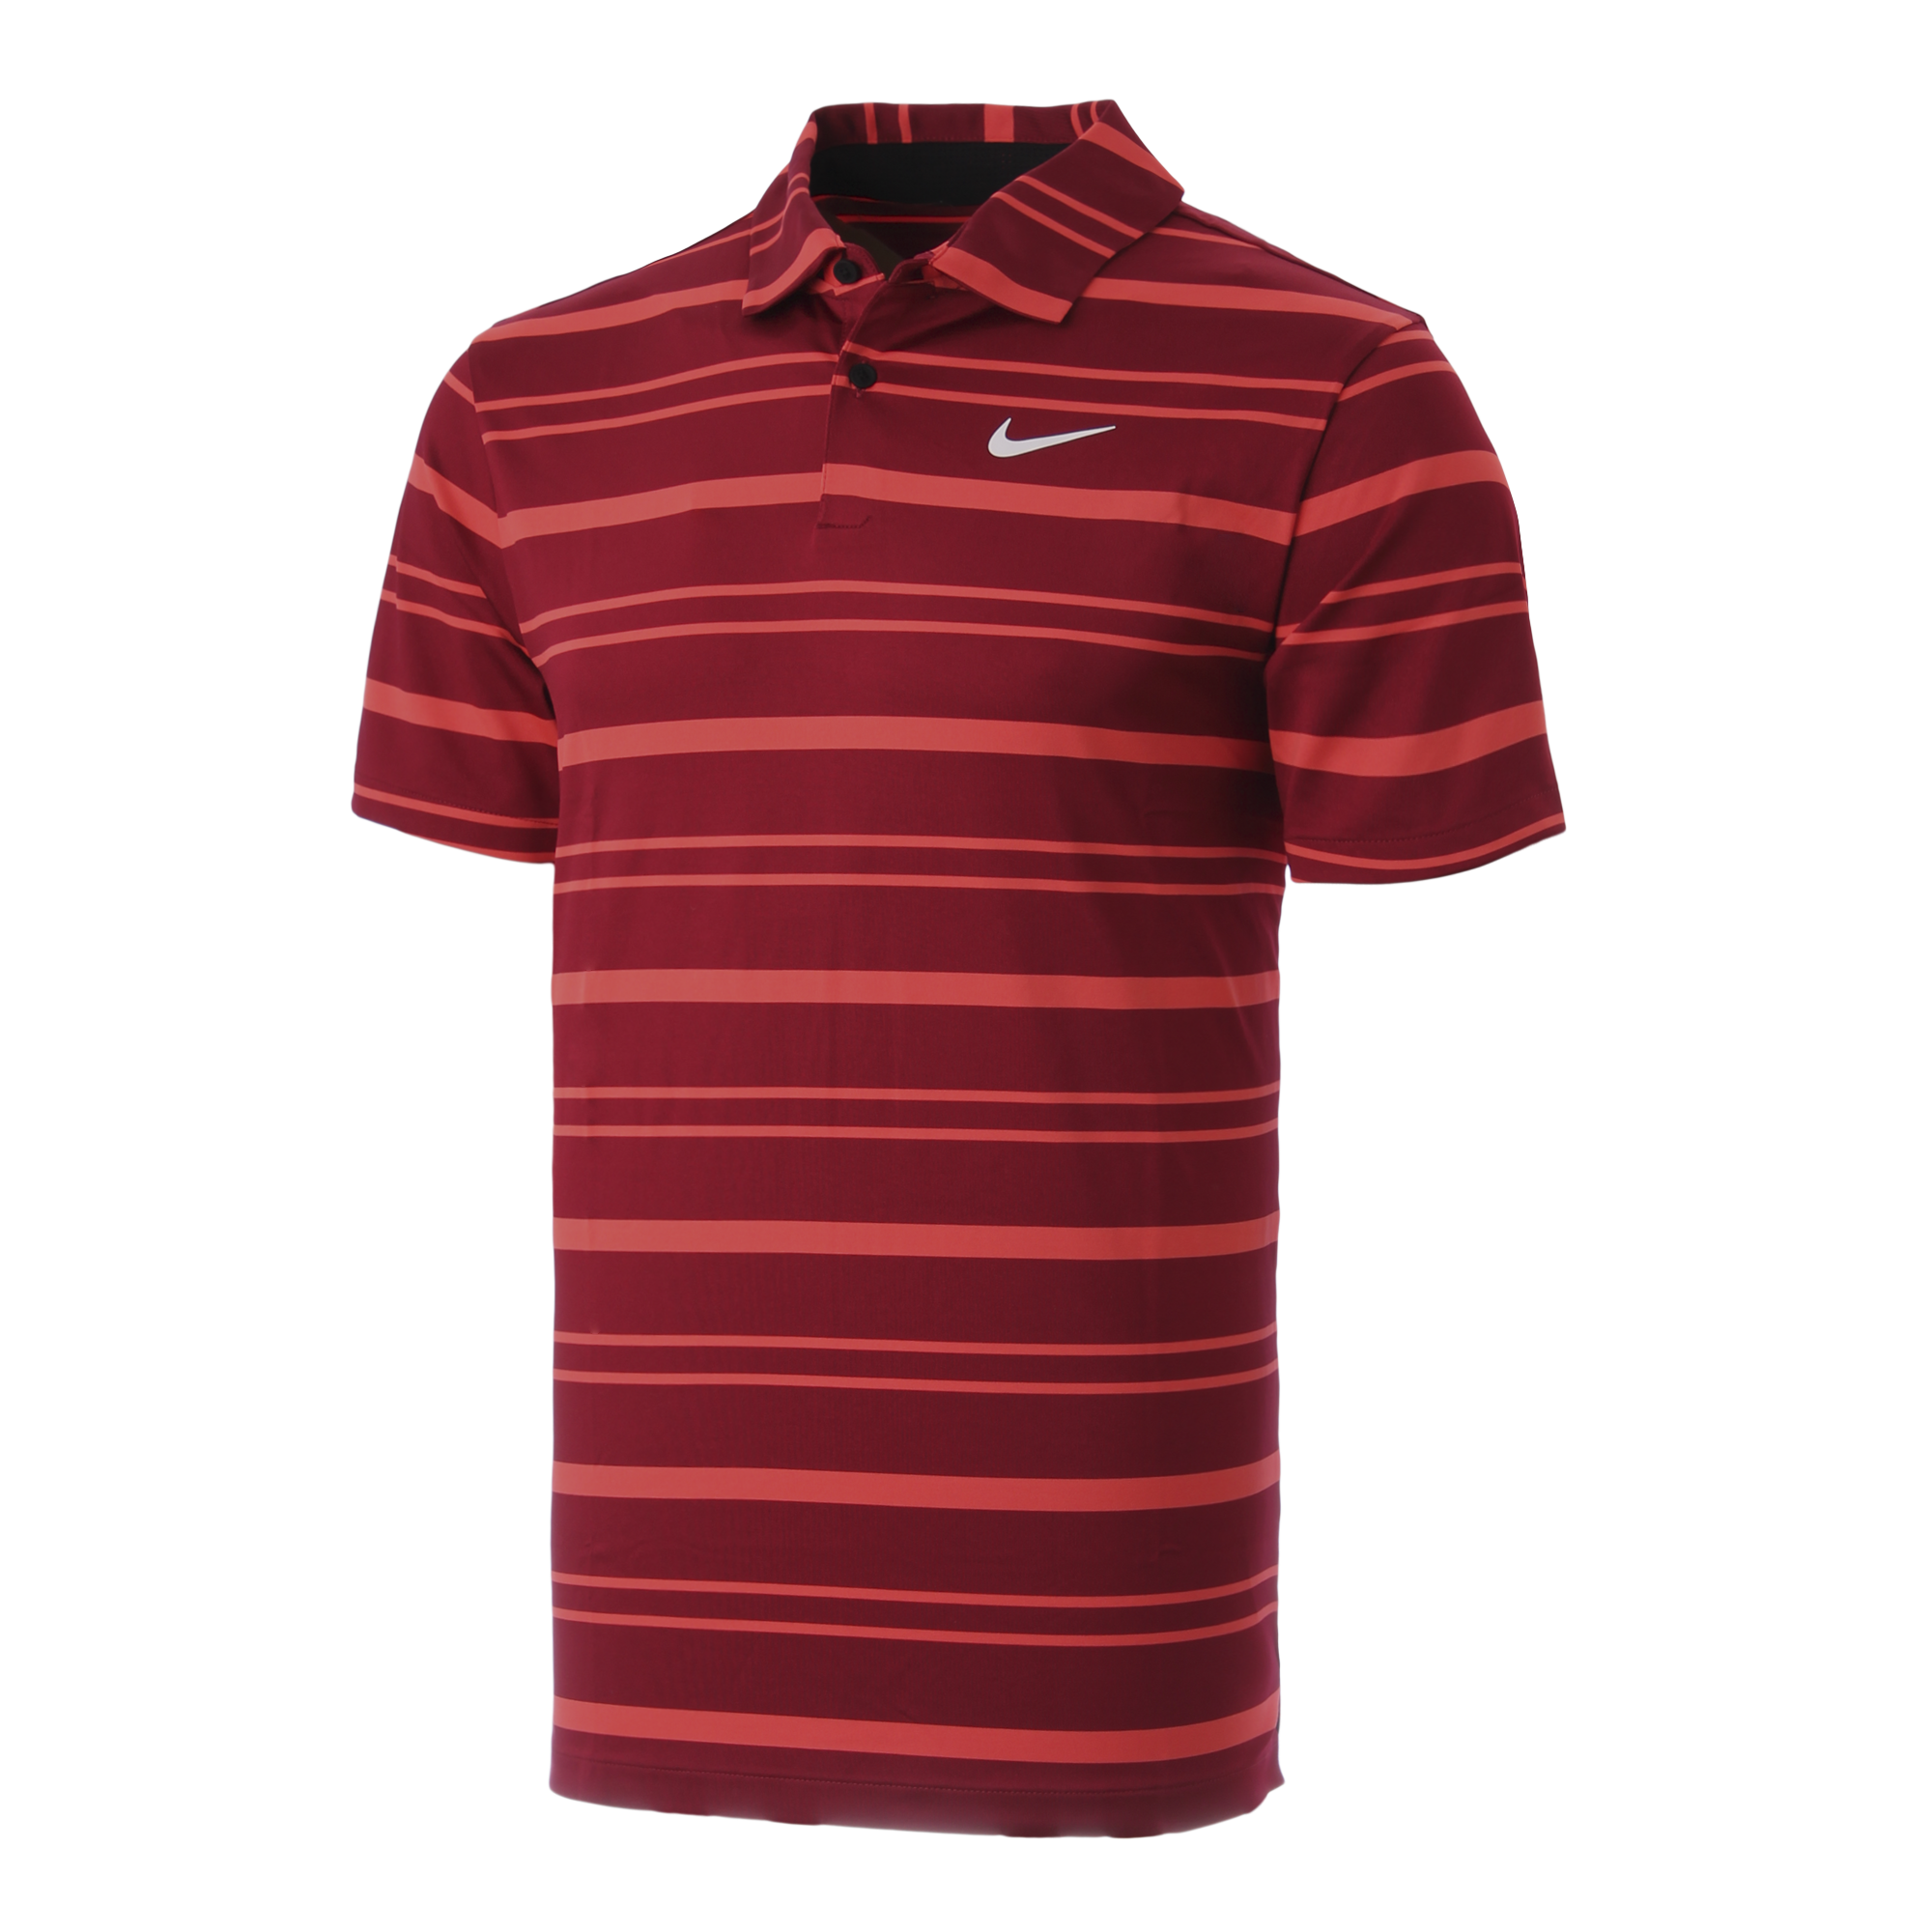 The Athletic Dept Nike Short Sleeve Polo Shirt Striped Cream Red Black  Large